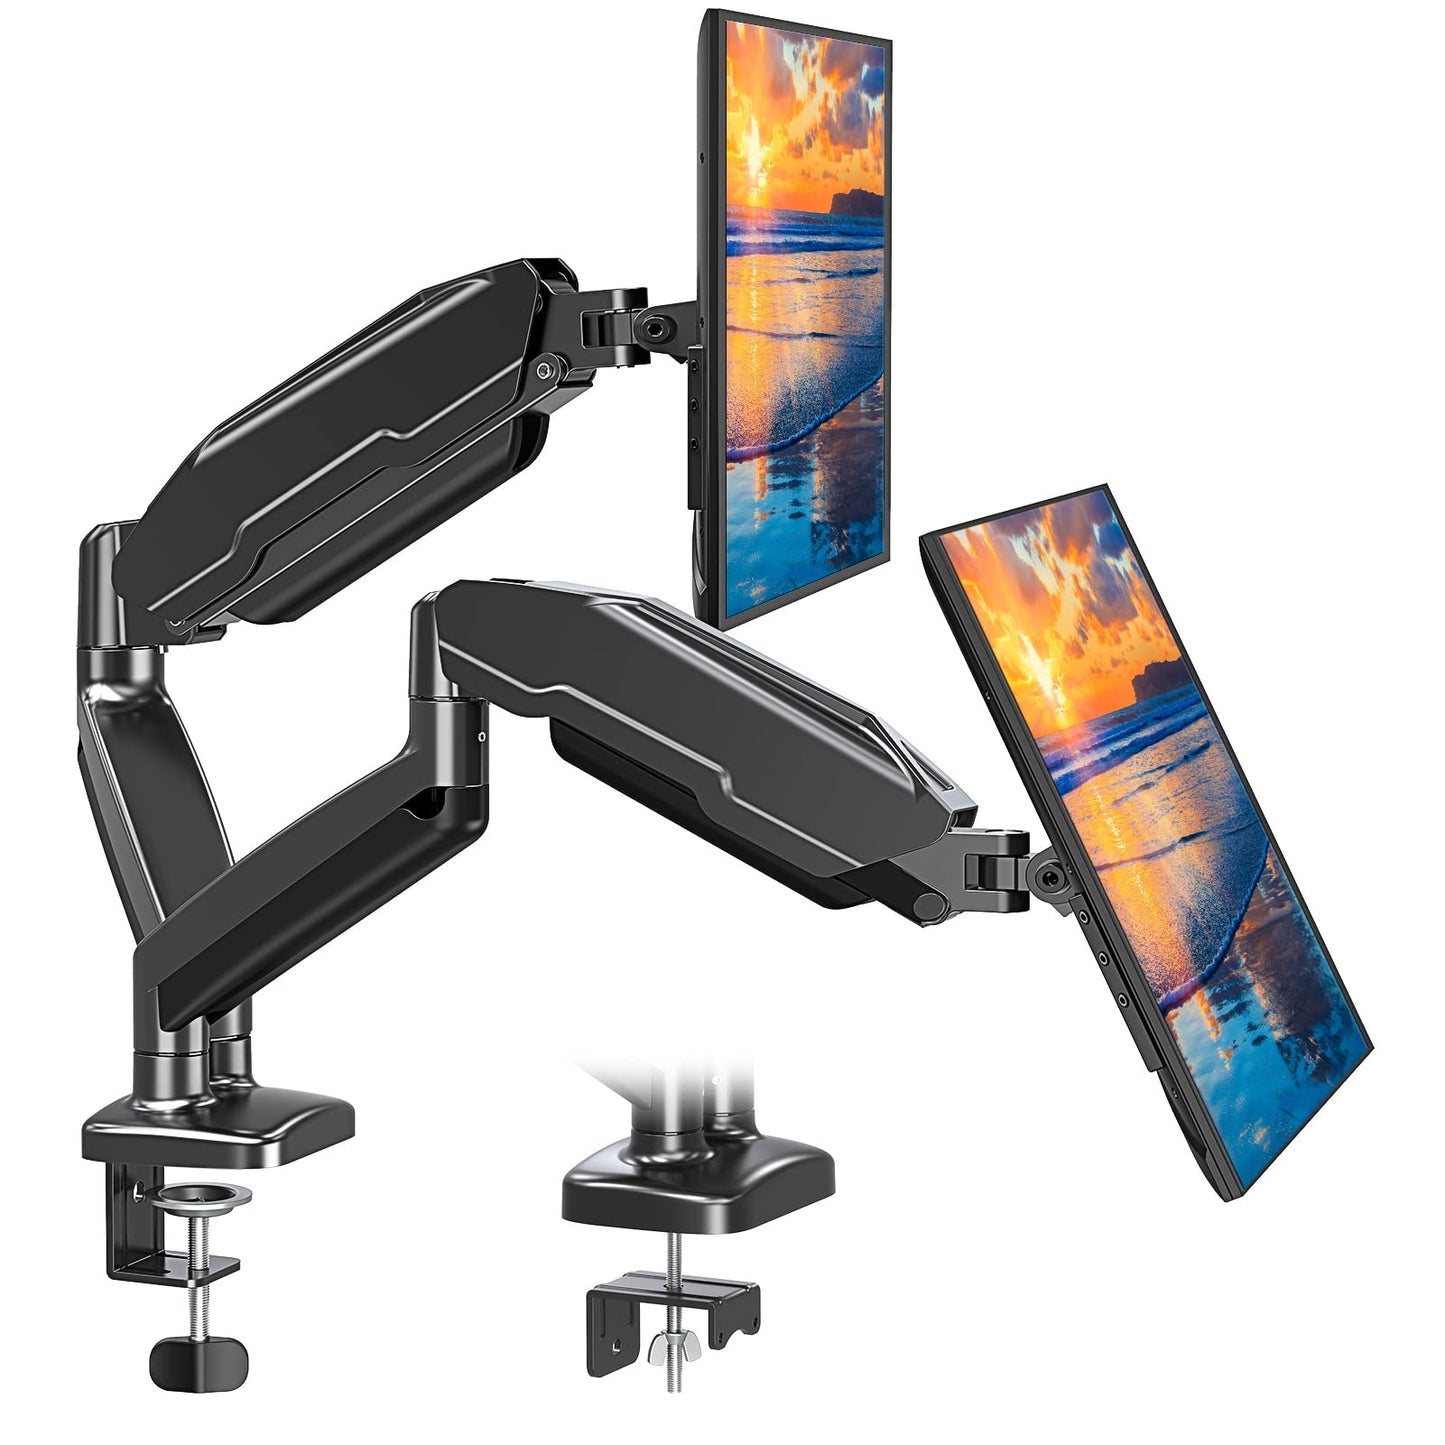 MOUNT PRO Dual Monitor Mount Fits 13 to 32 Inch Computer Screen, Height Adjustable Monitor Stand for 2 Monitors, Gas Spring Monitor Arm Holds up to 17. 6lbs Each, Monitor Desk VESA Mount, Black